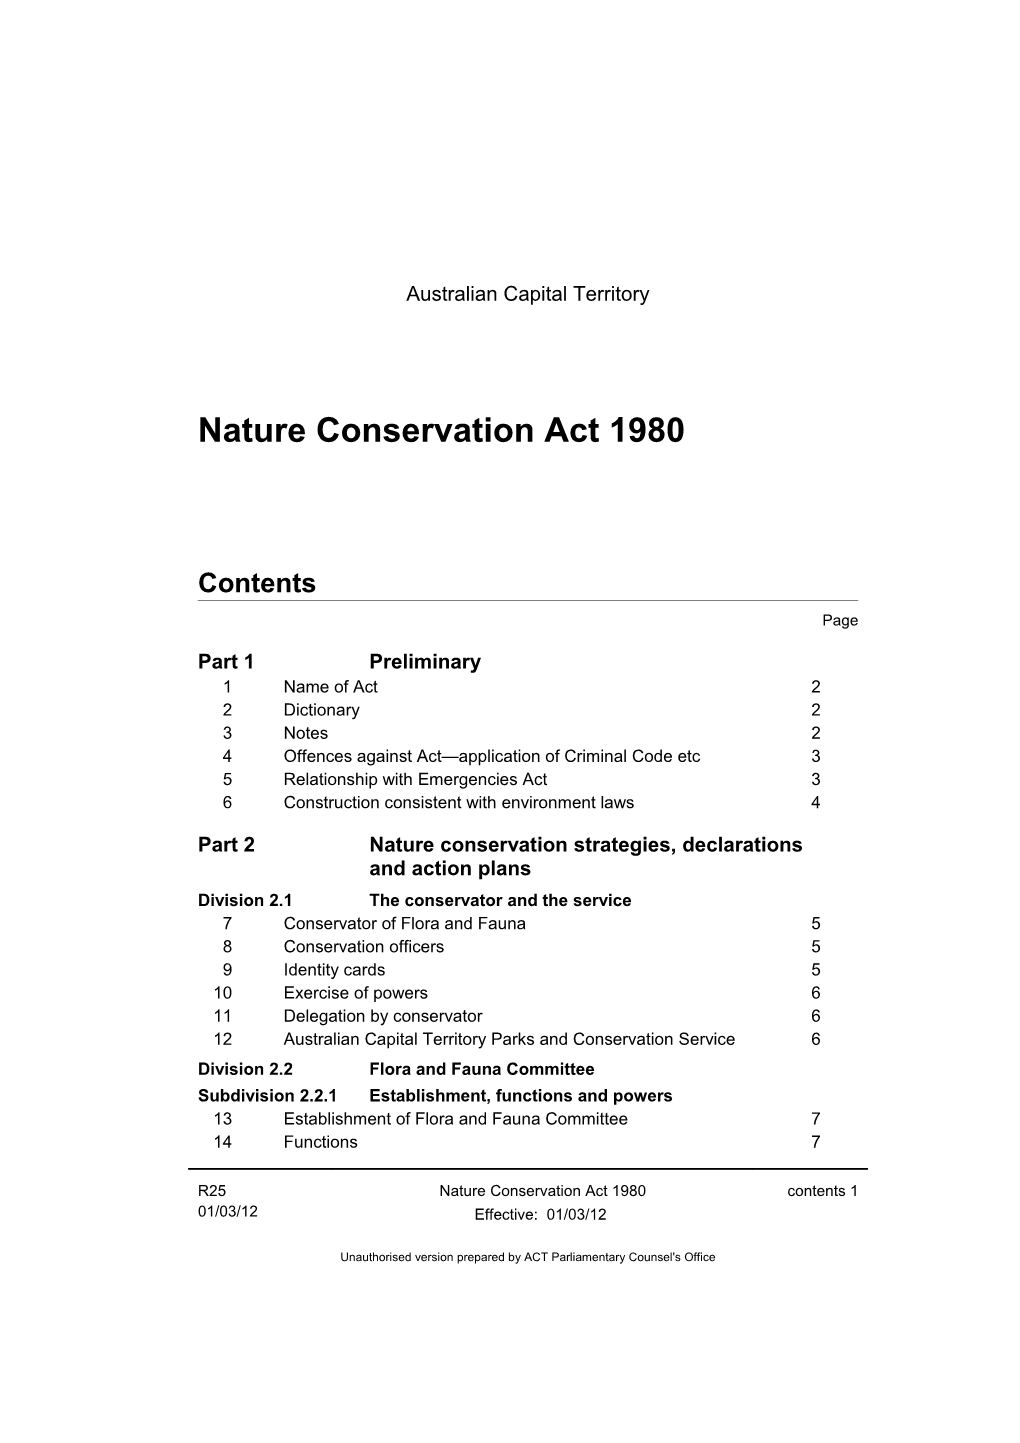 Nature Conservation Act 1980